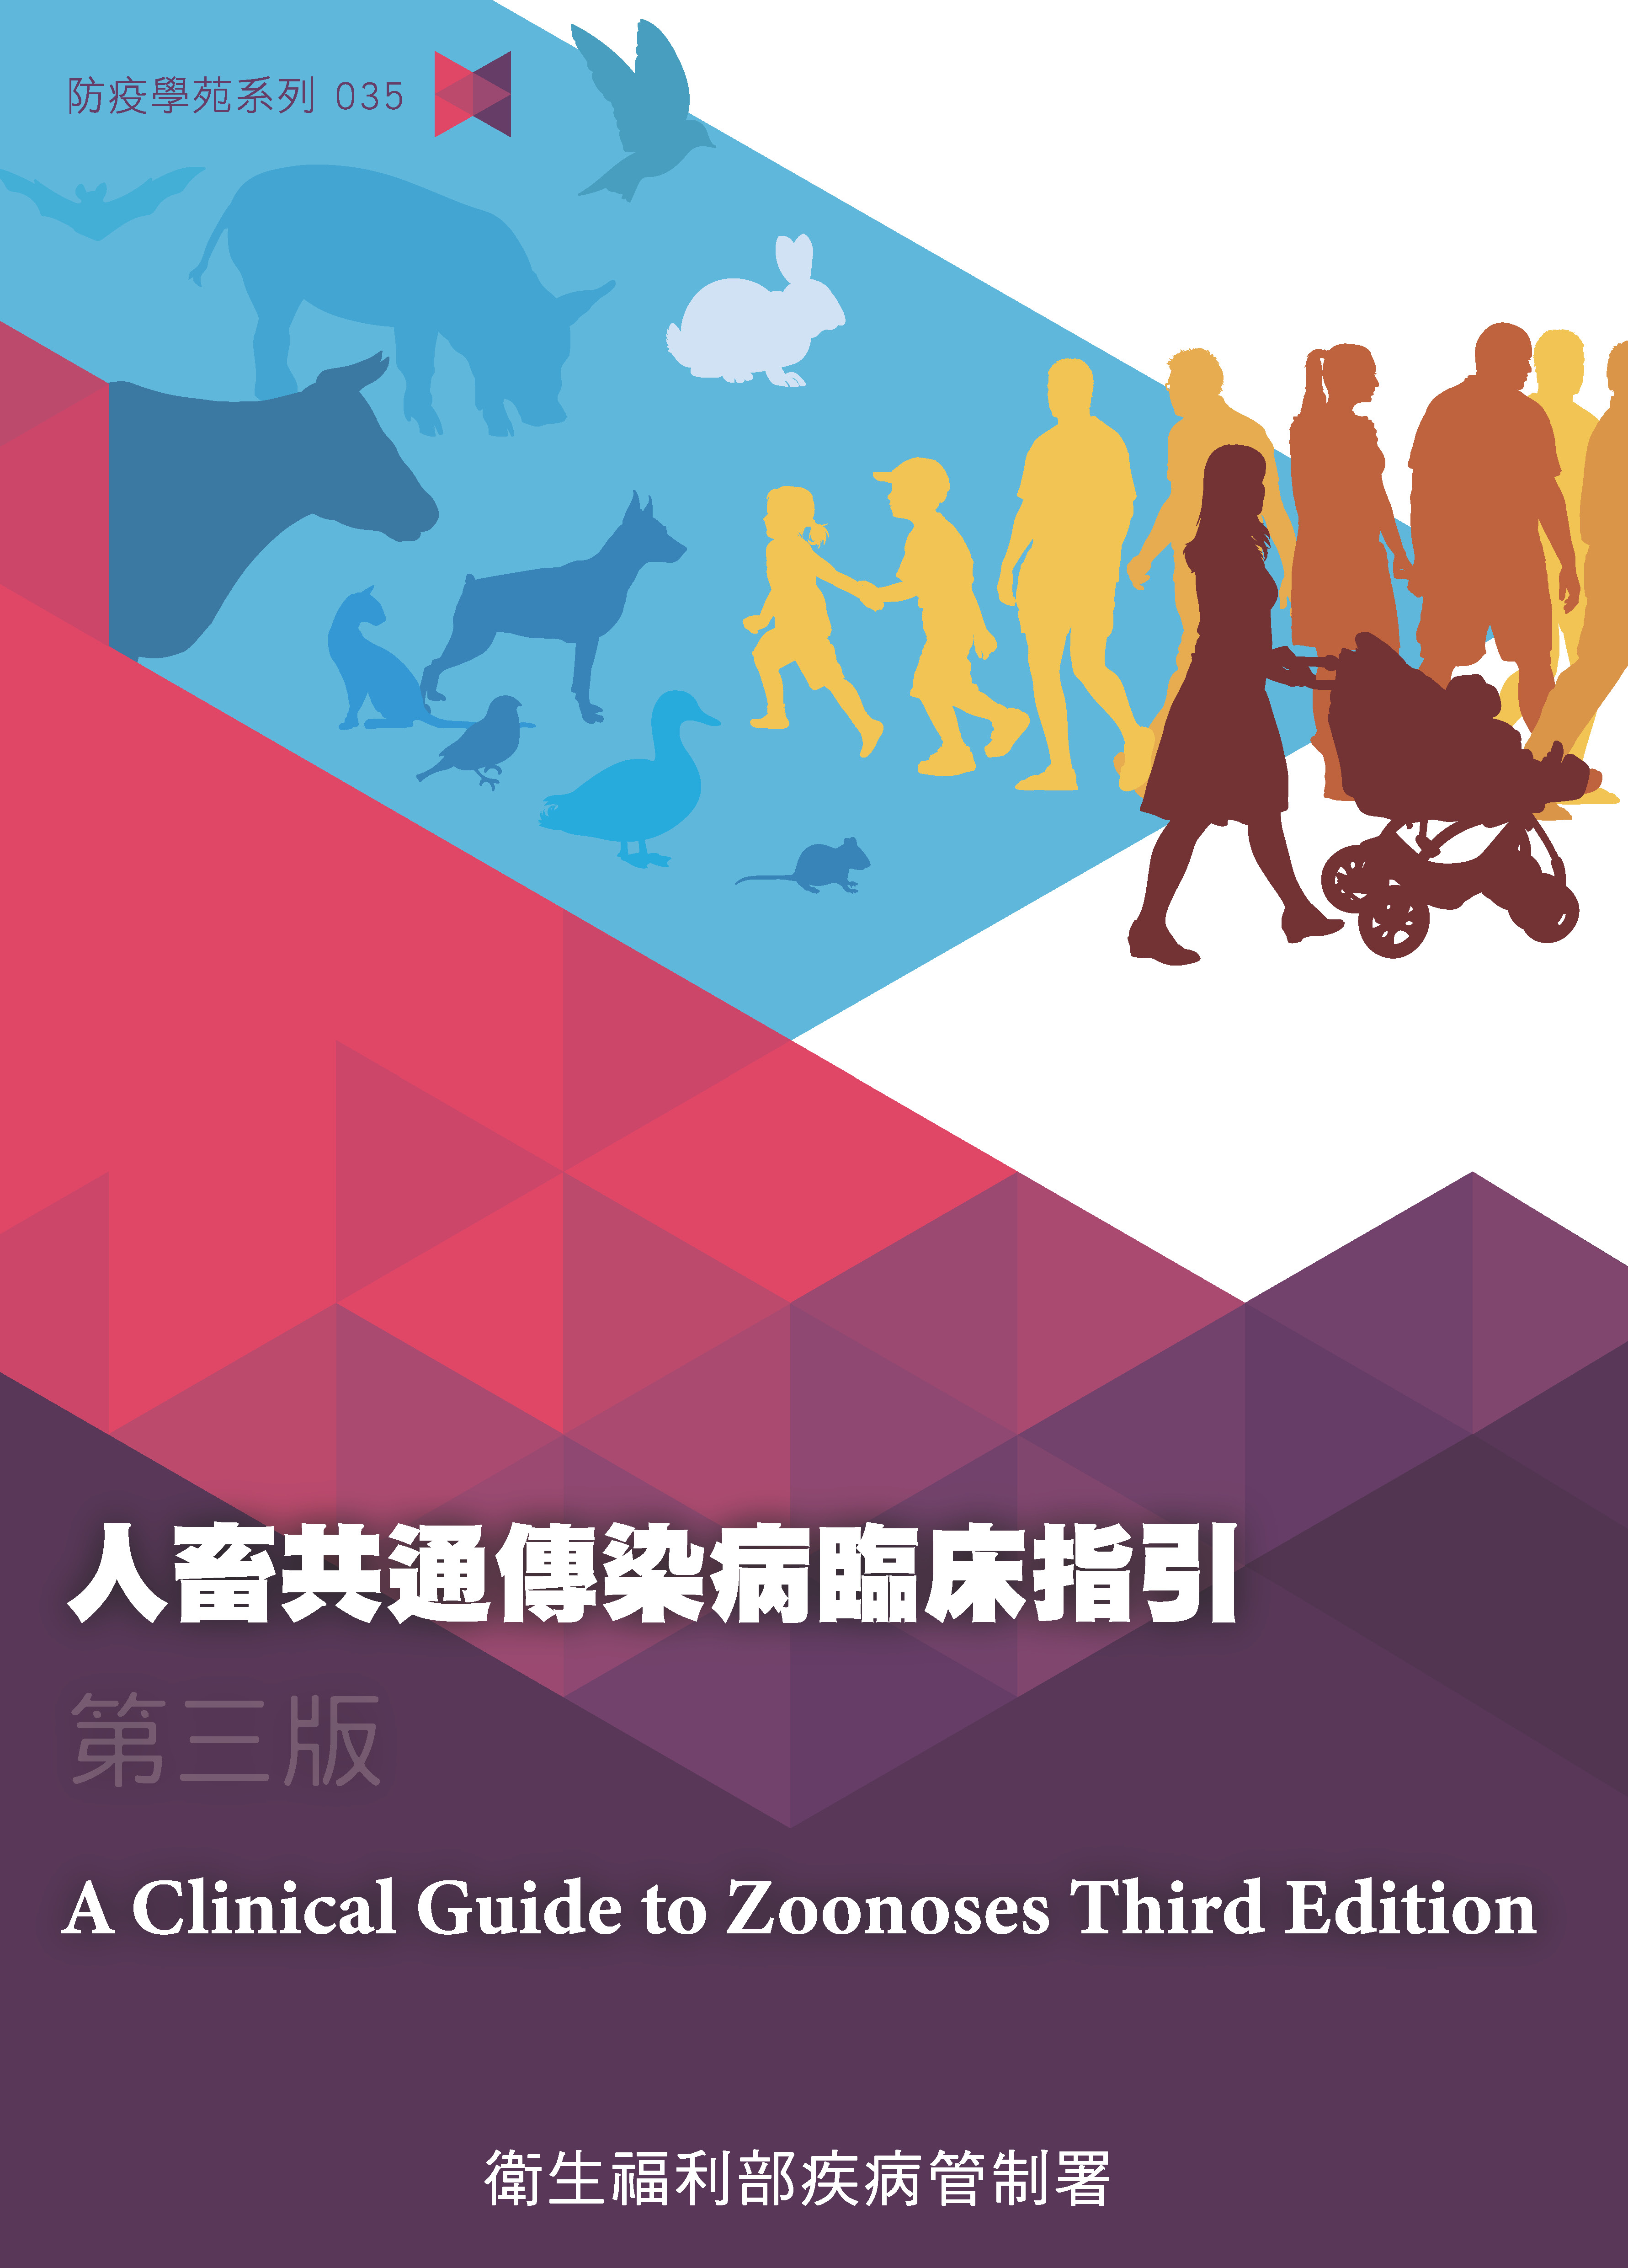 A Clinical Guide to Zoonoses Third Edition